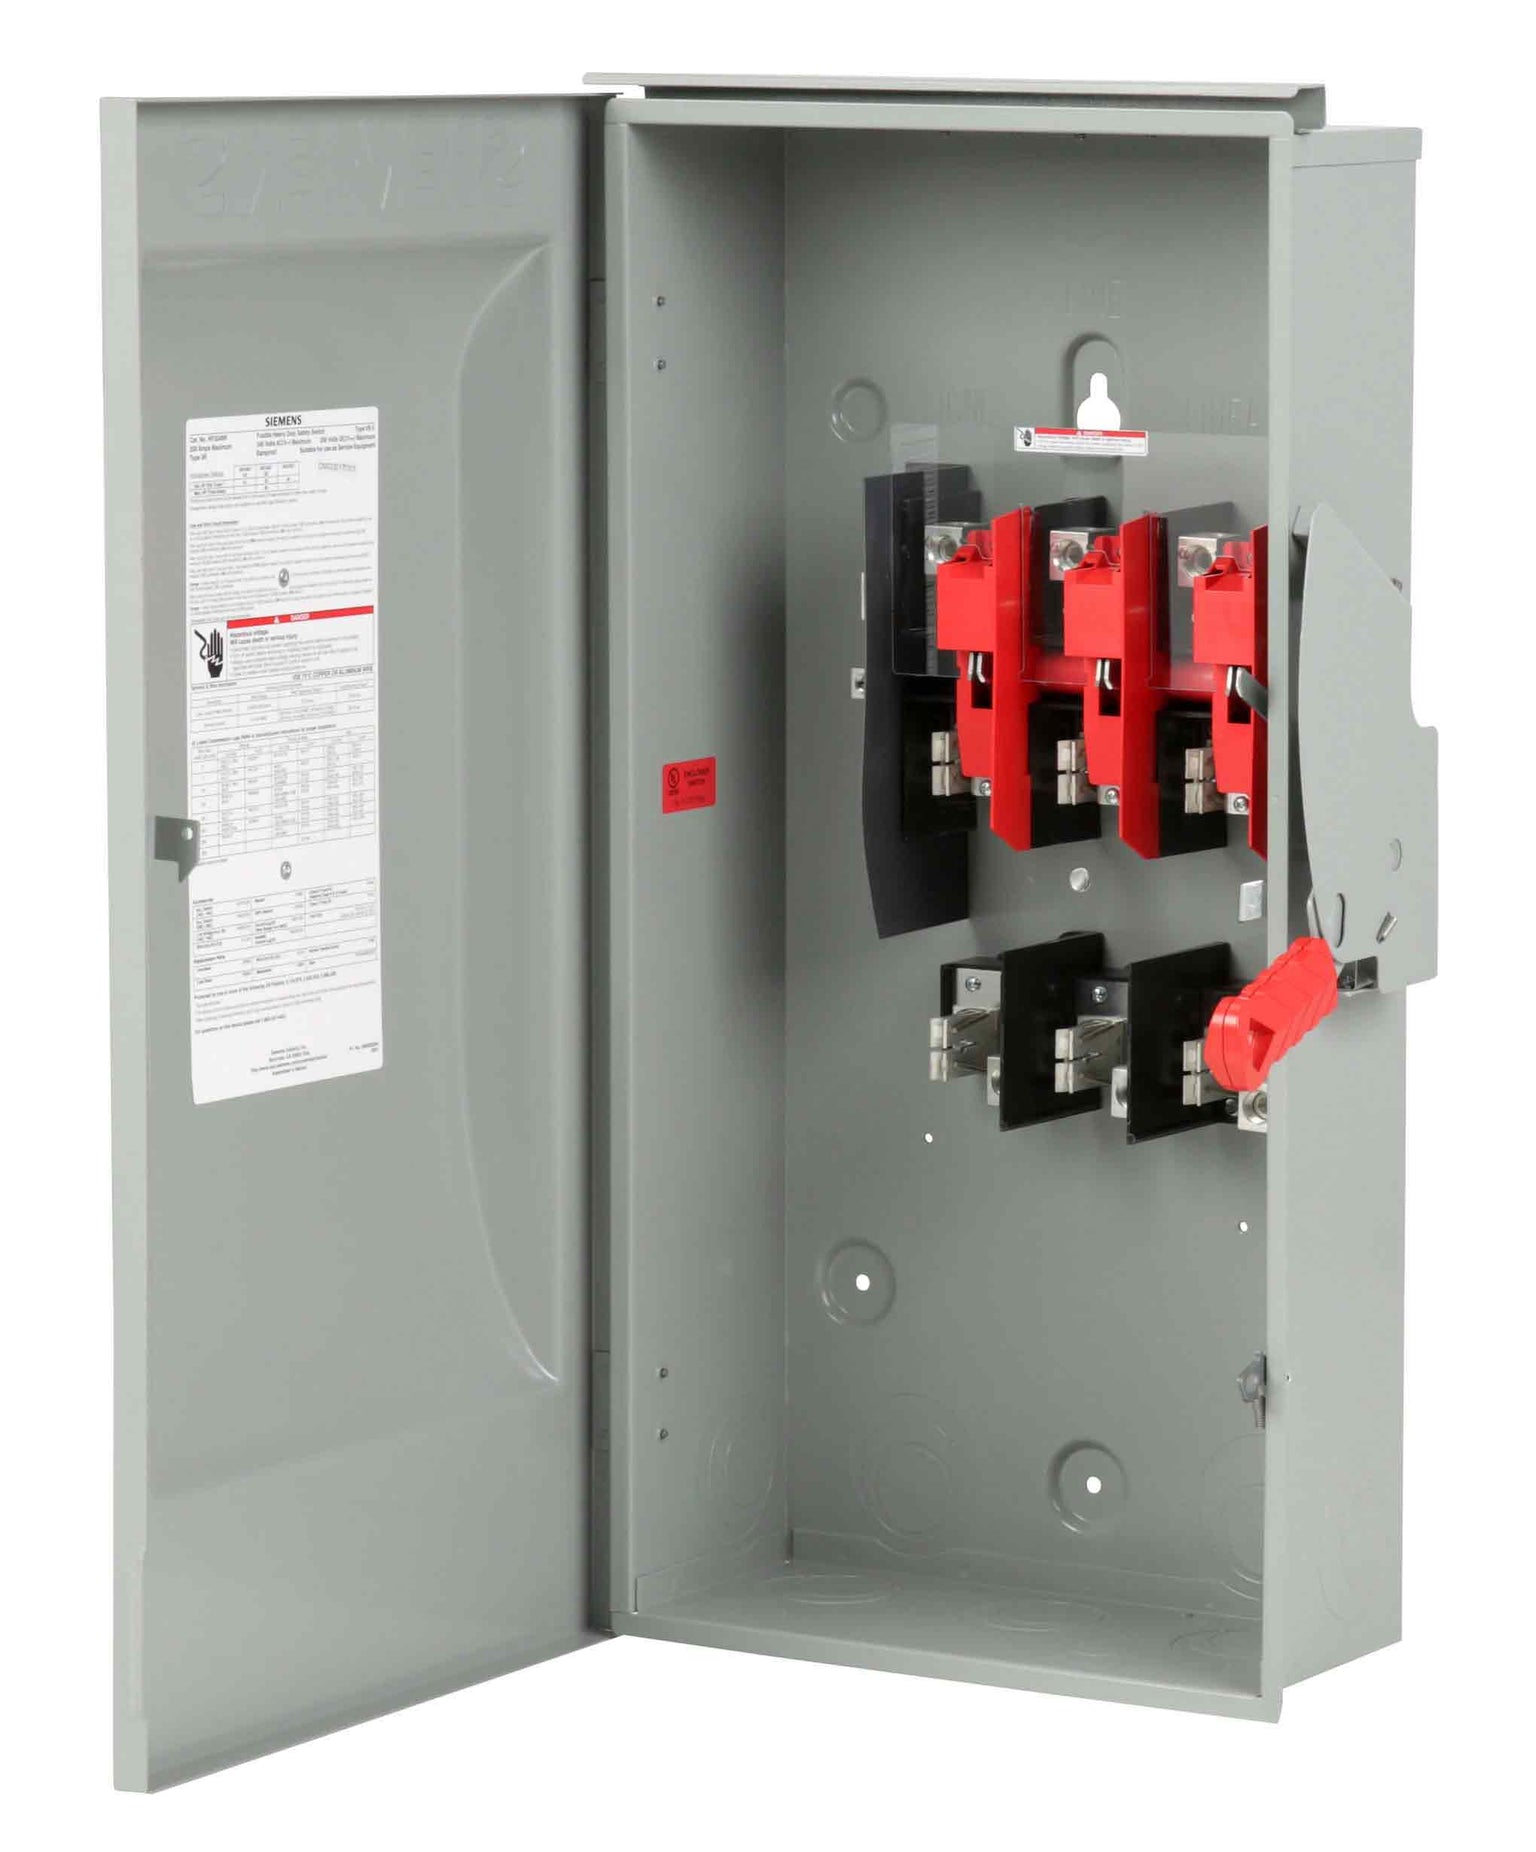 HFC324NR - Siemens - 200 Amp Disconnect Safety Switches